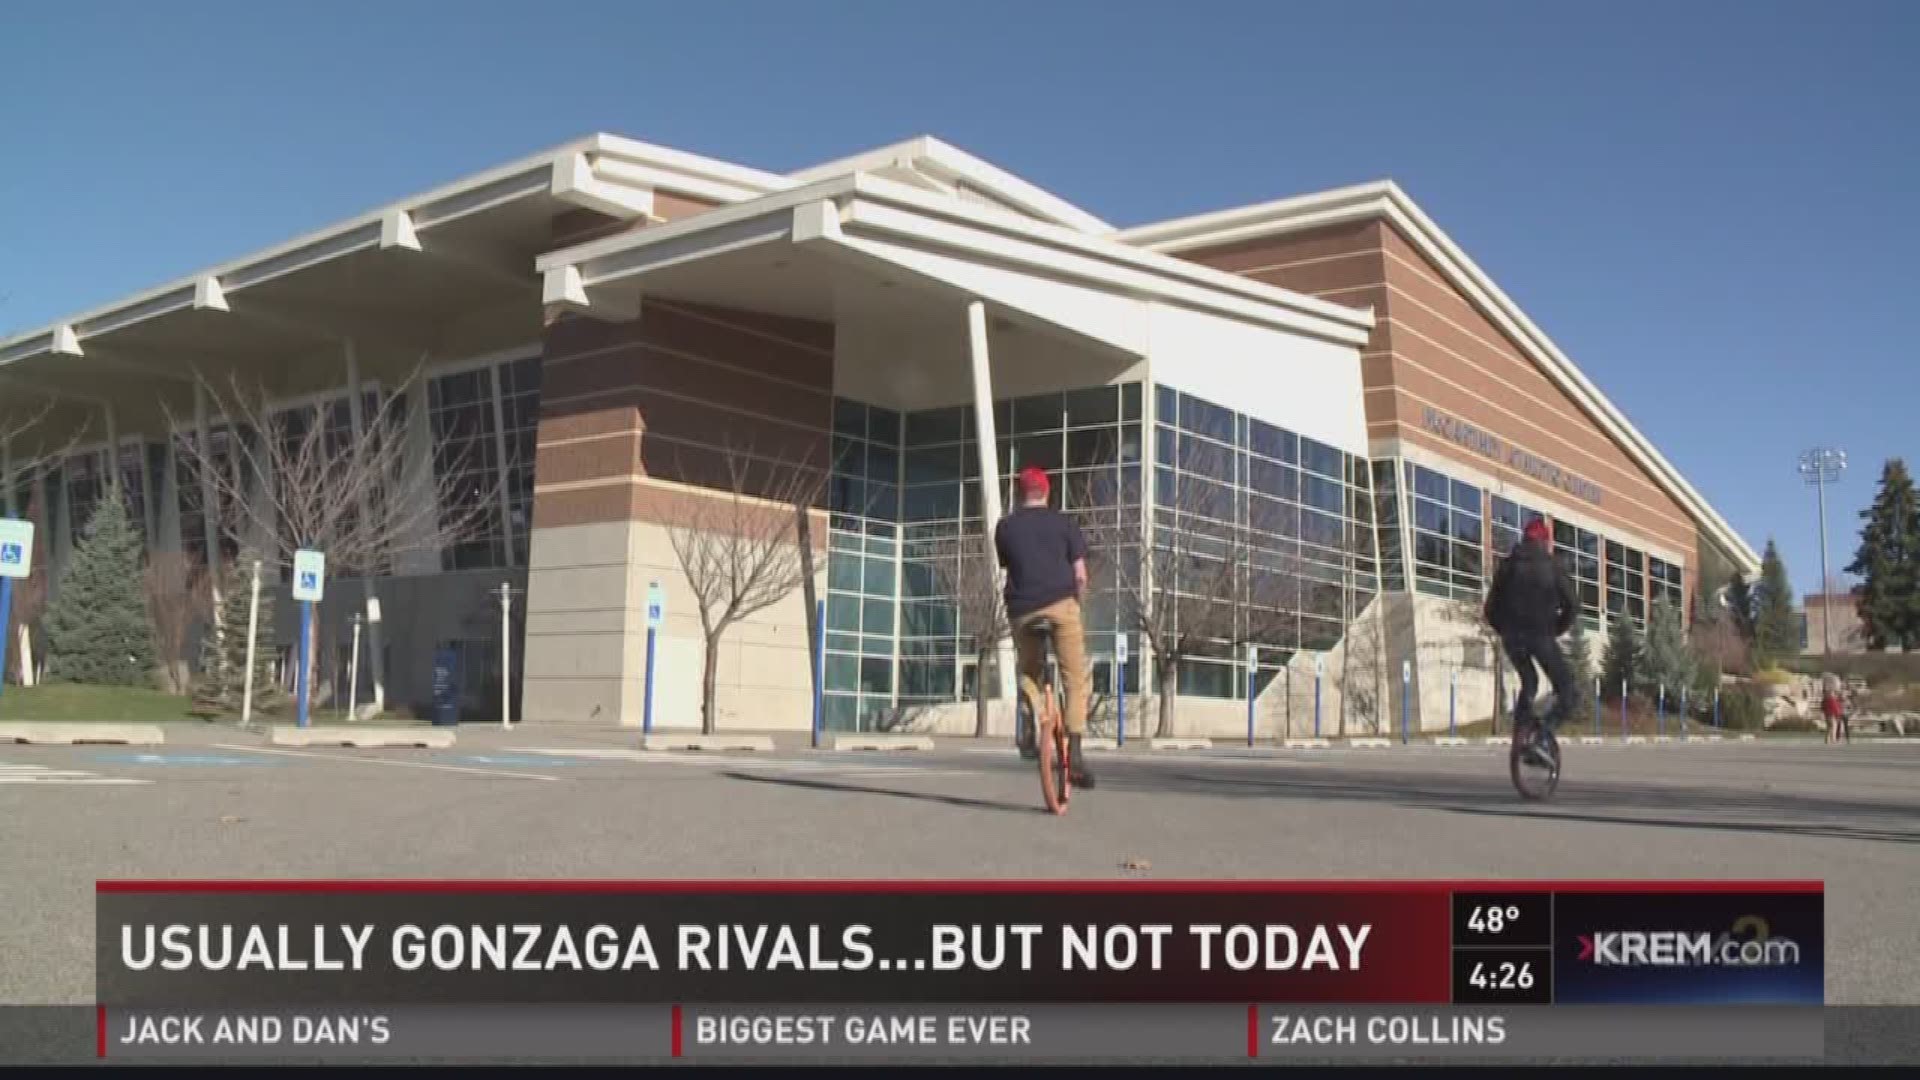 KREM 2's Rob Harris shares the story of a BYU family who normally route against the Zags, but became Zags fans just for the National Championship.